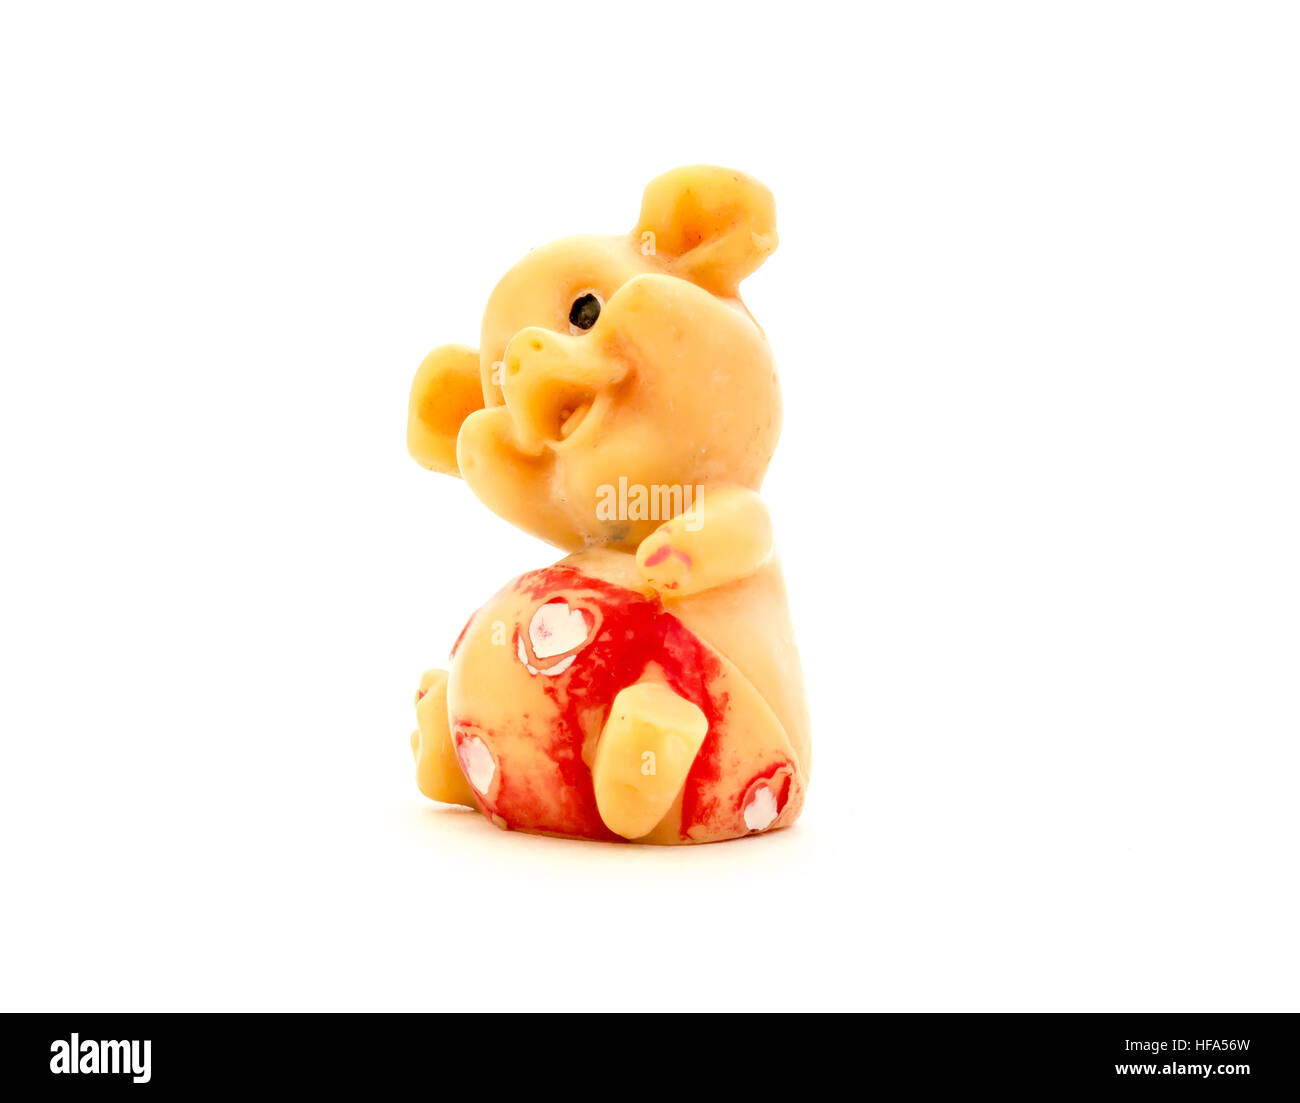 The Miniature isolated toy pig. Stock Photo